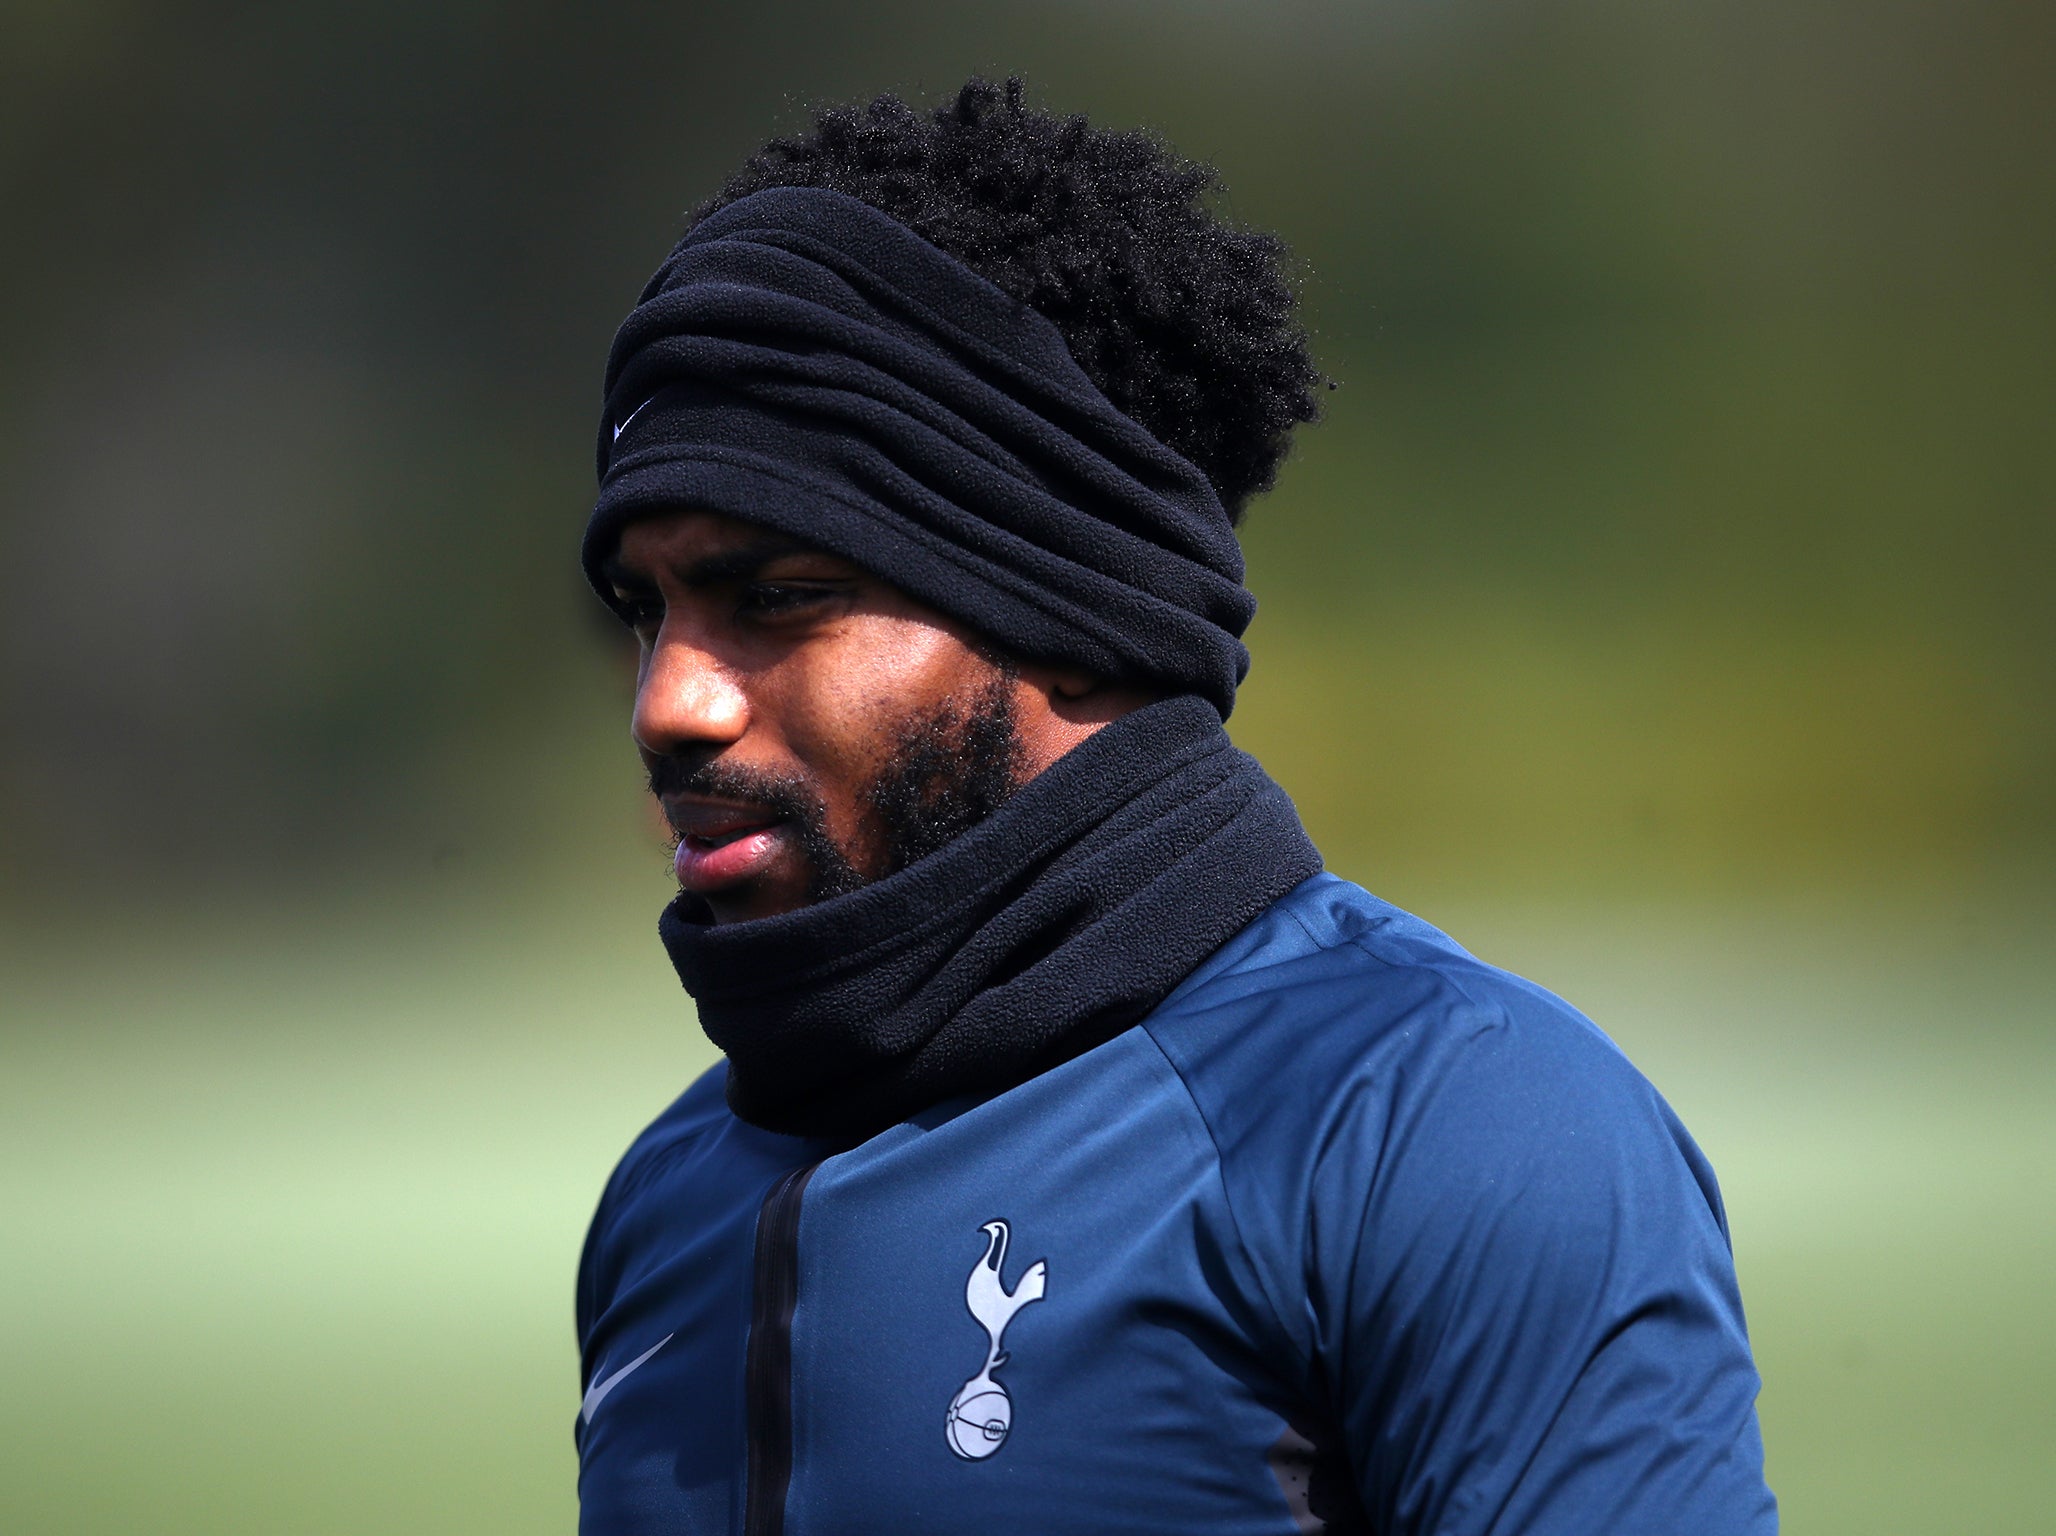 Danny Rose is currently preparing for the Champions League final